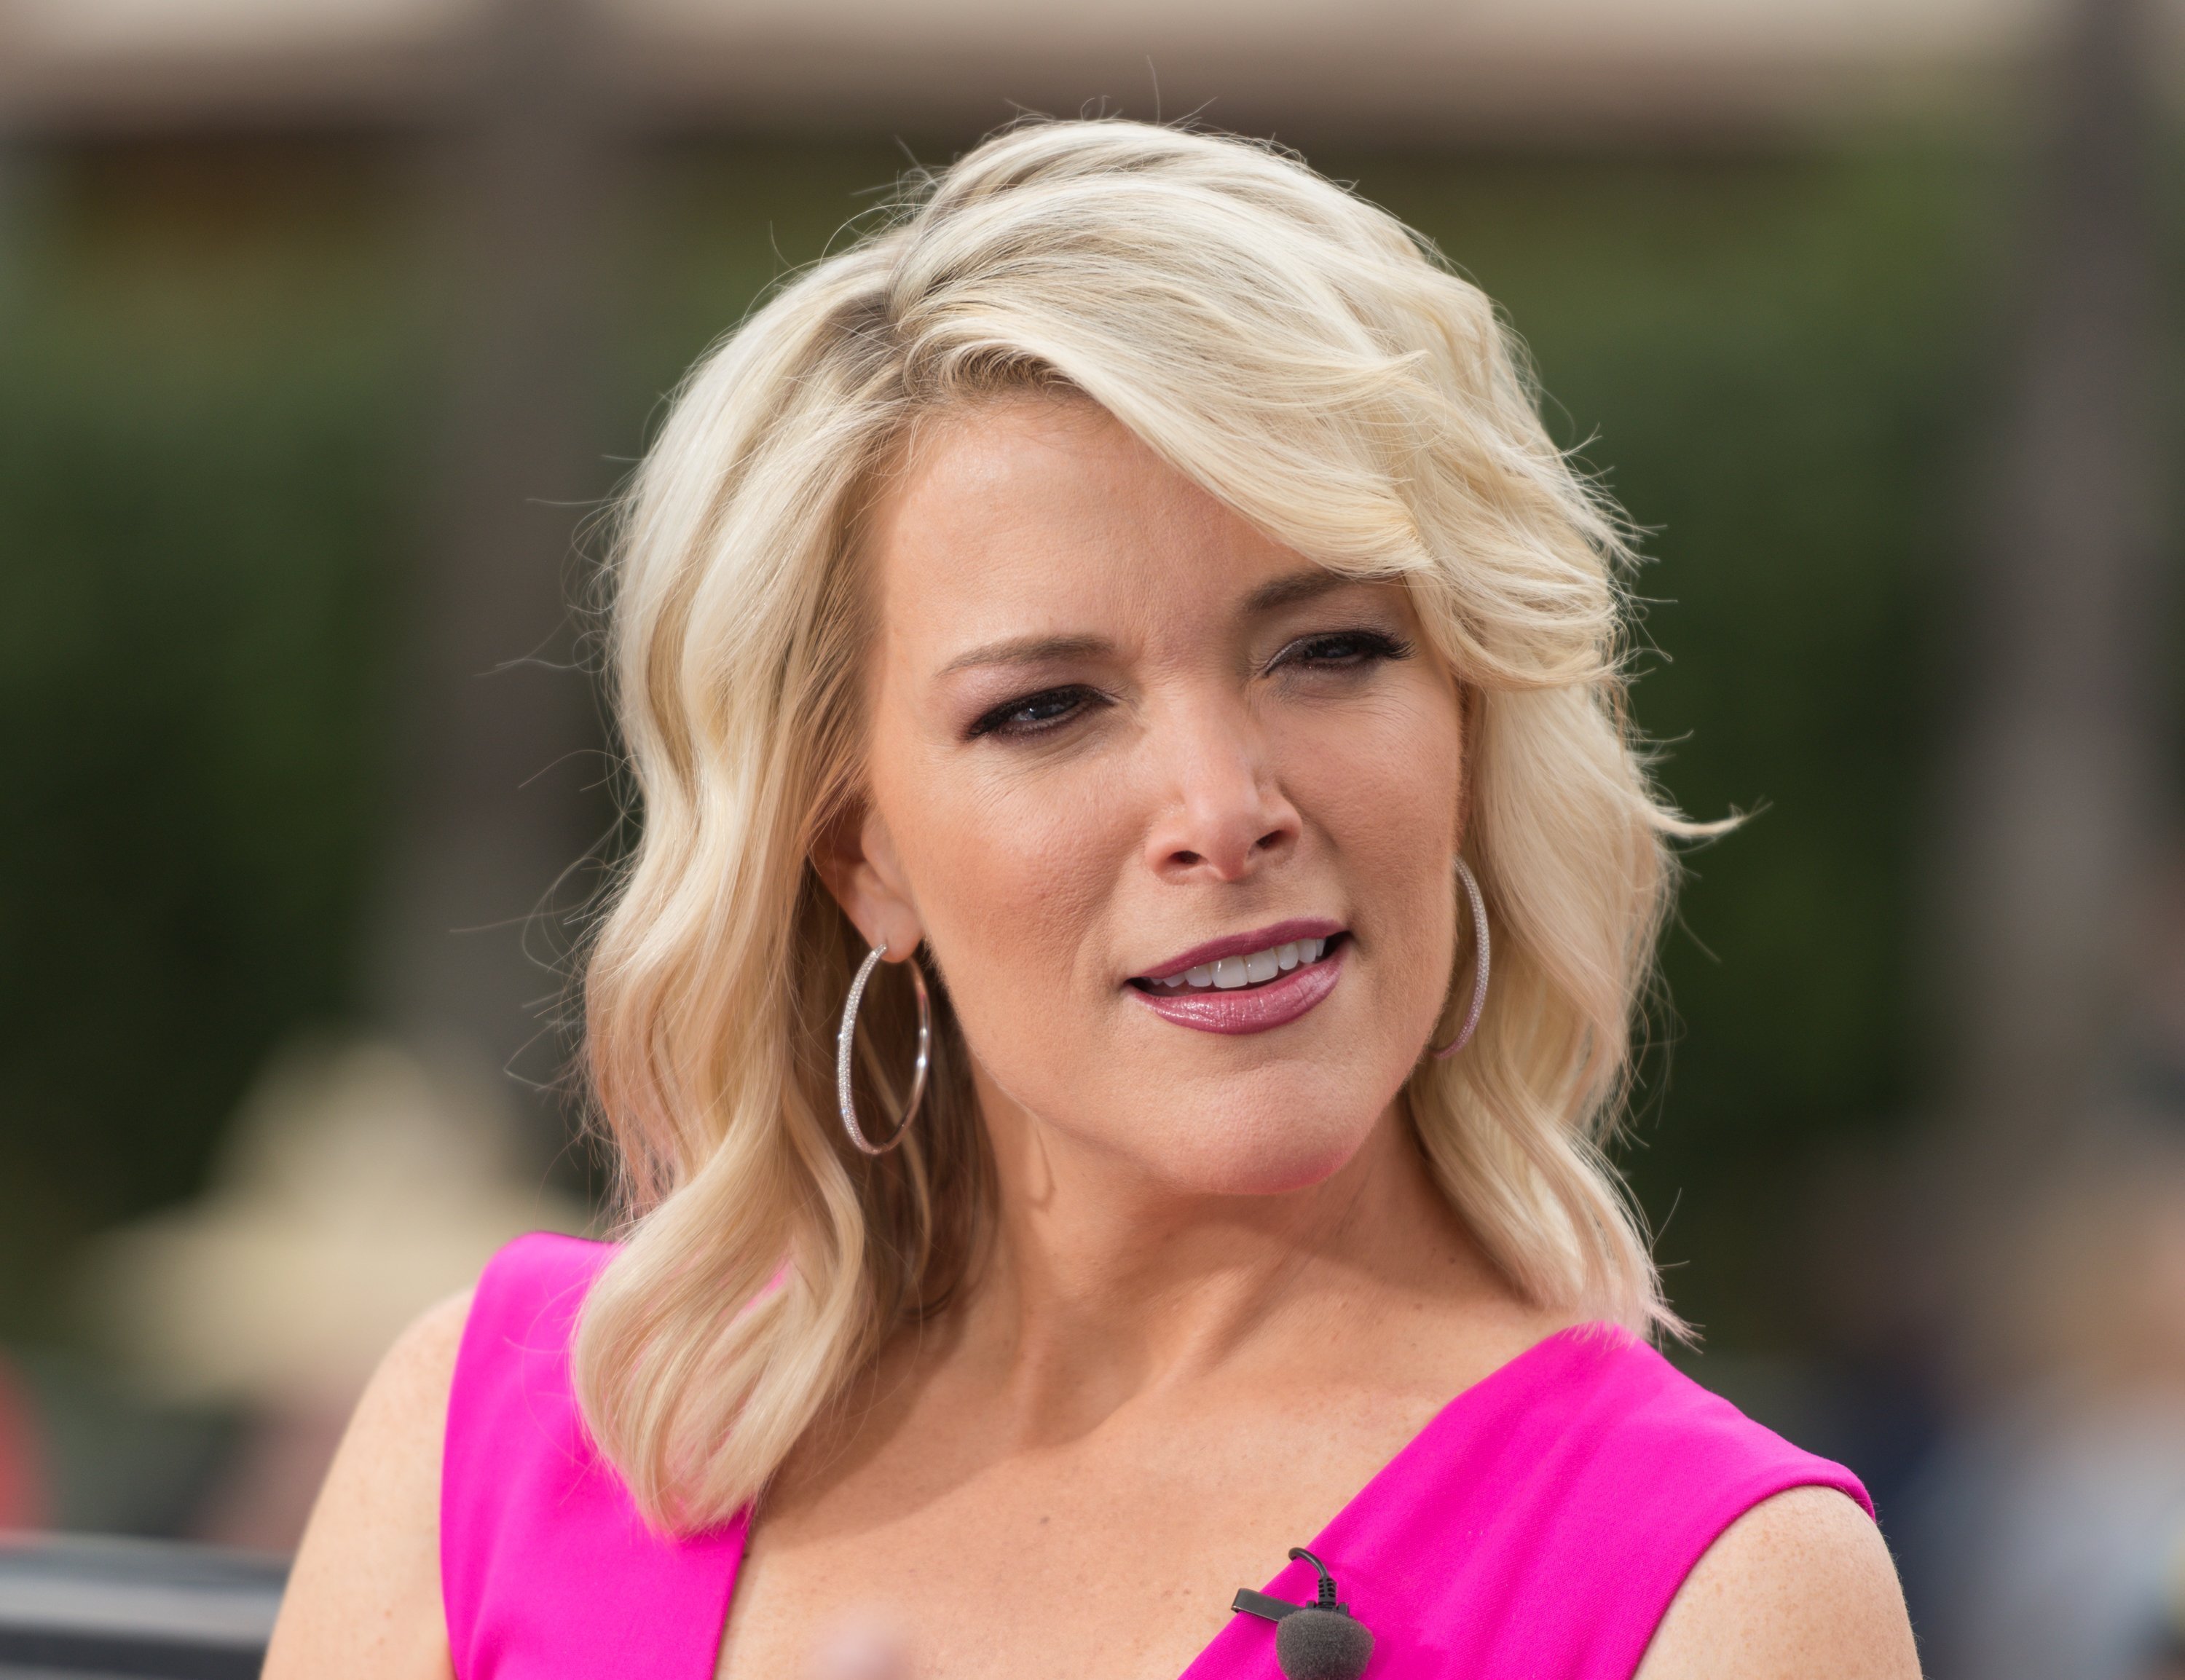 Megyn Kelly visits "Extra" at Universal Studios Hollywood on September 19, 2017, in Universal City, California | Photo: Getty Images